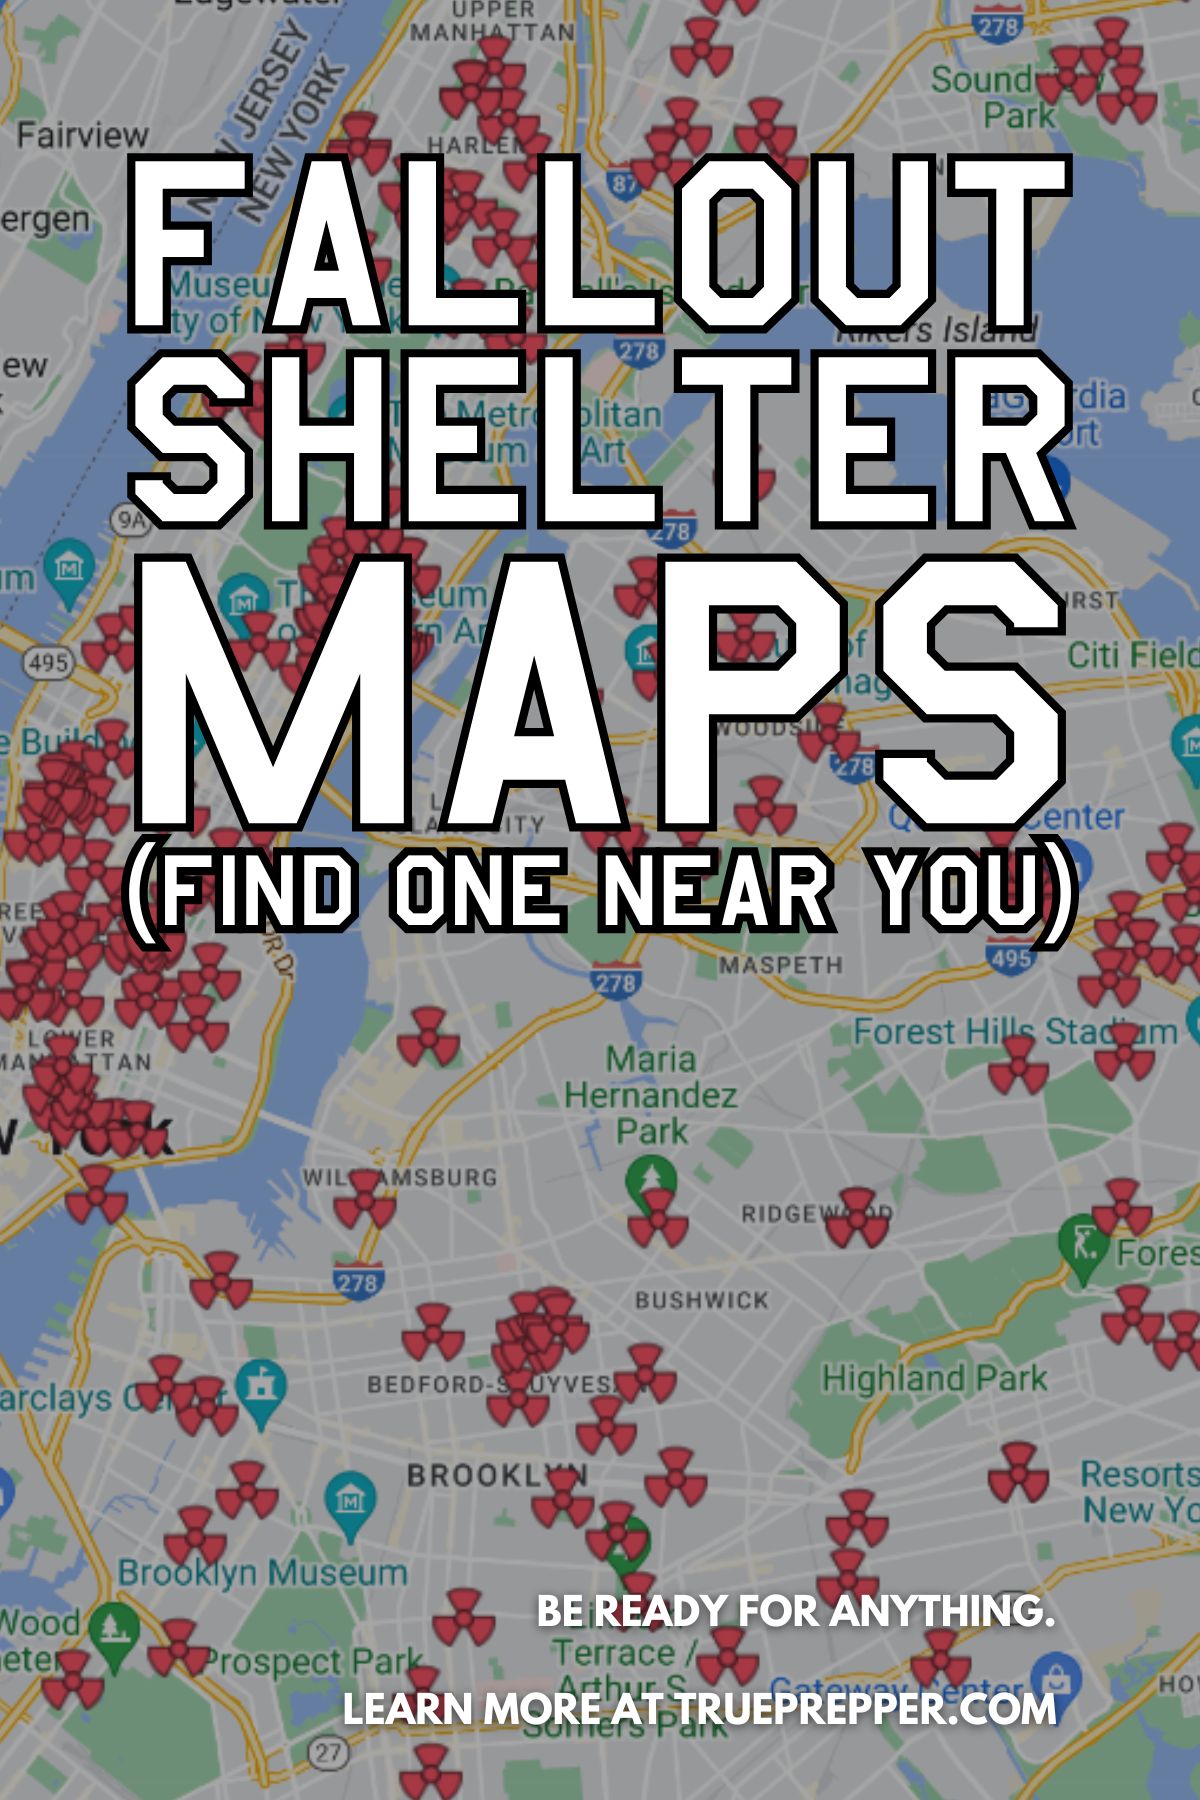 Fallout Shelter Maps (Find One Near You)